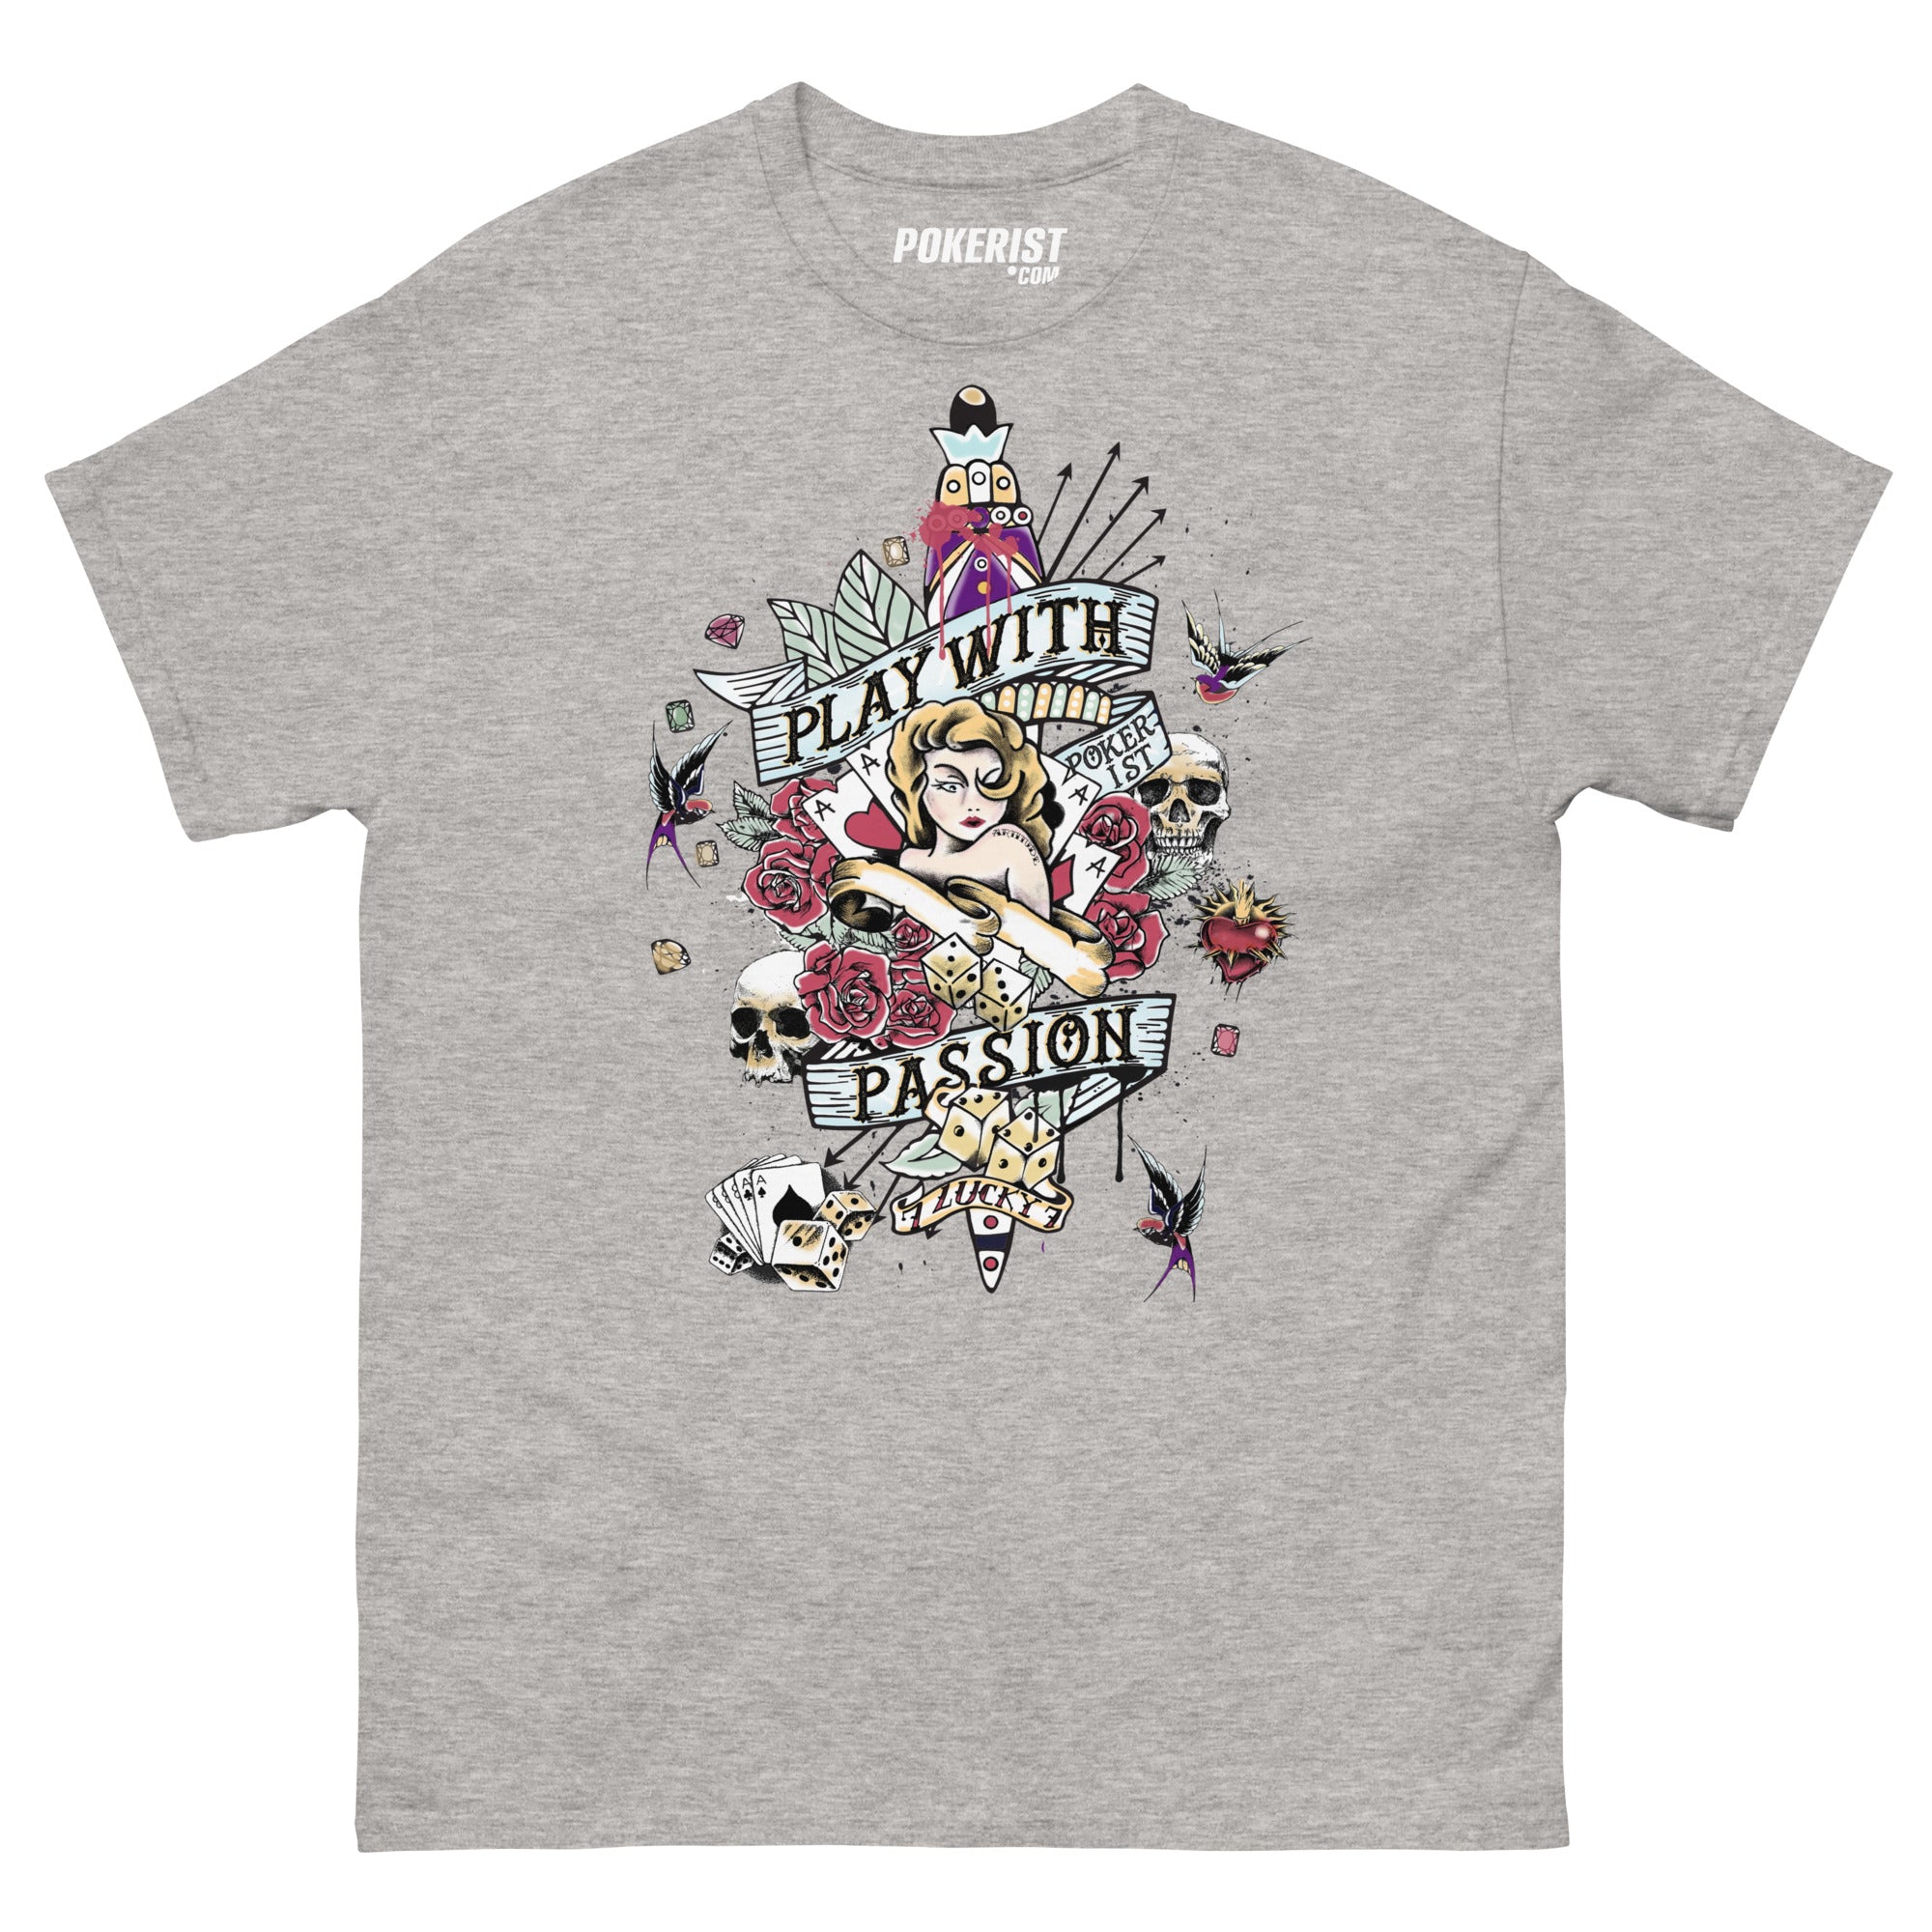 Play With Passion - Men's classic tee - Pokerist